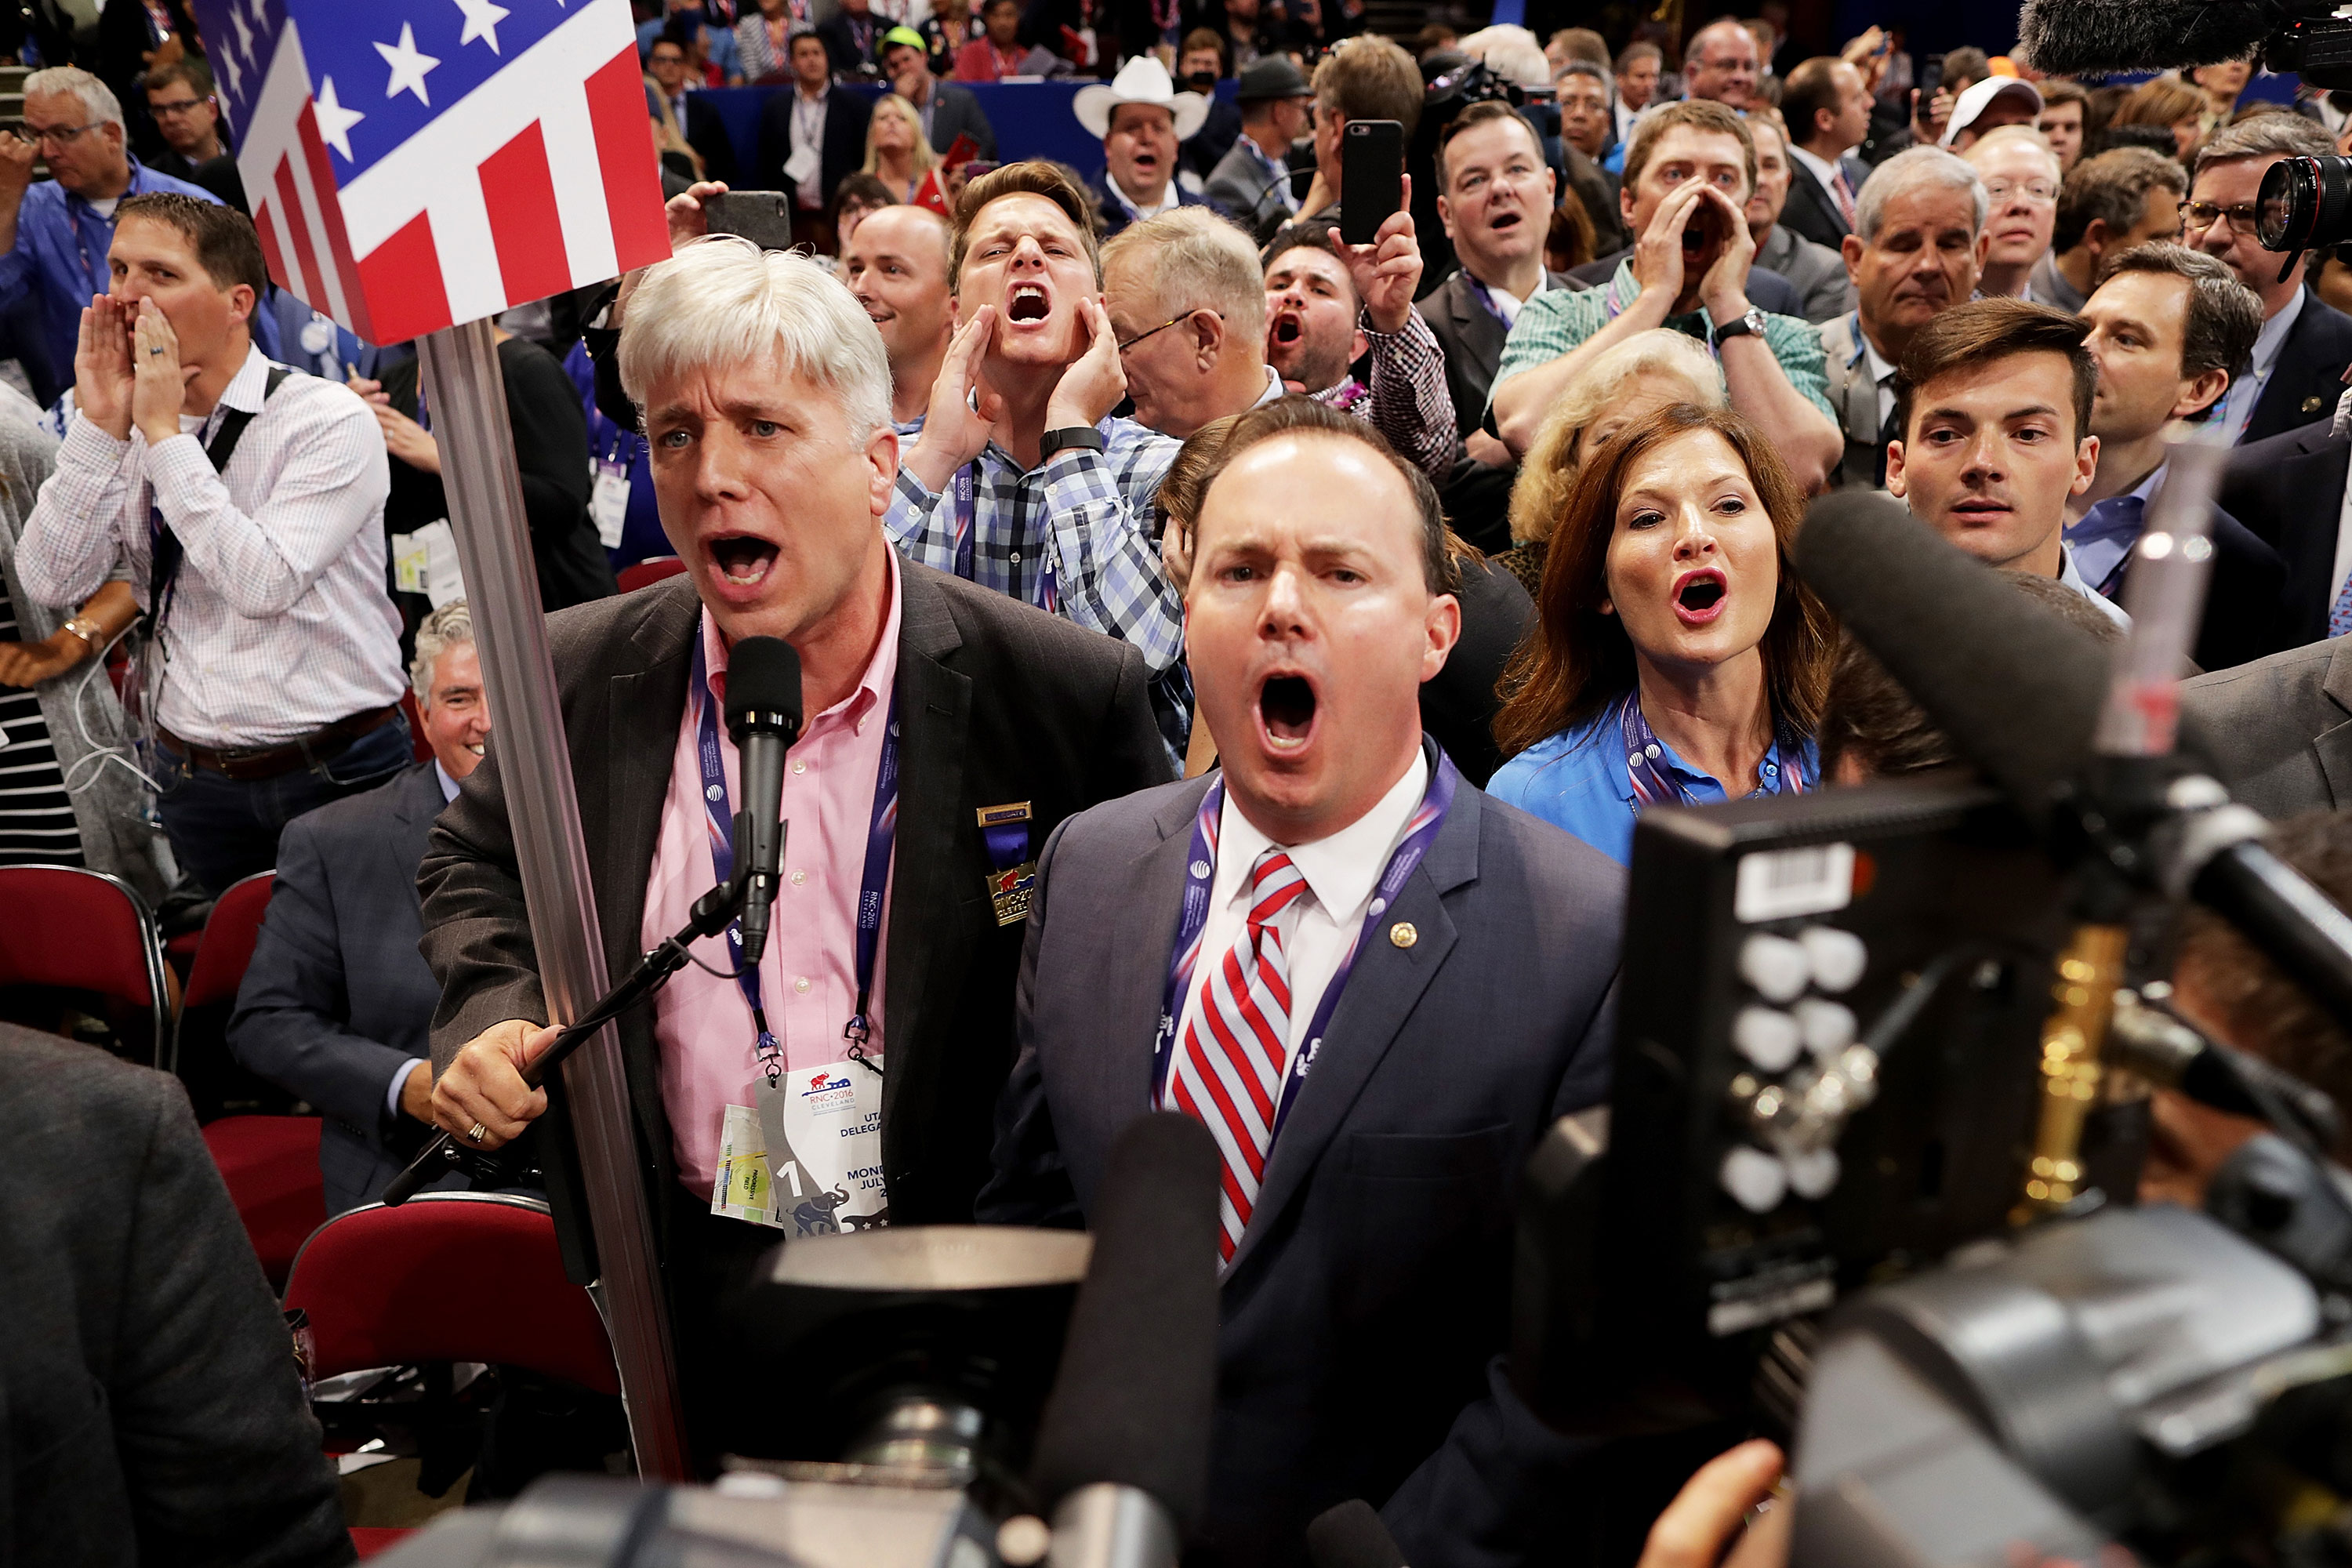 Sen. Mike Lee, center, and others from the Utah State Delegation shout no to the adoption of rules without a roll call vote on the first day of the Republican National Convention in July 2016 in Cleveland, Ohio.